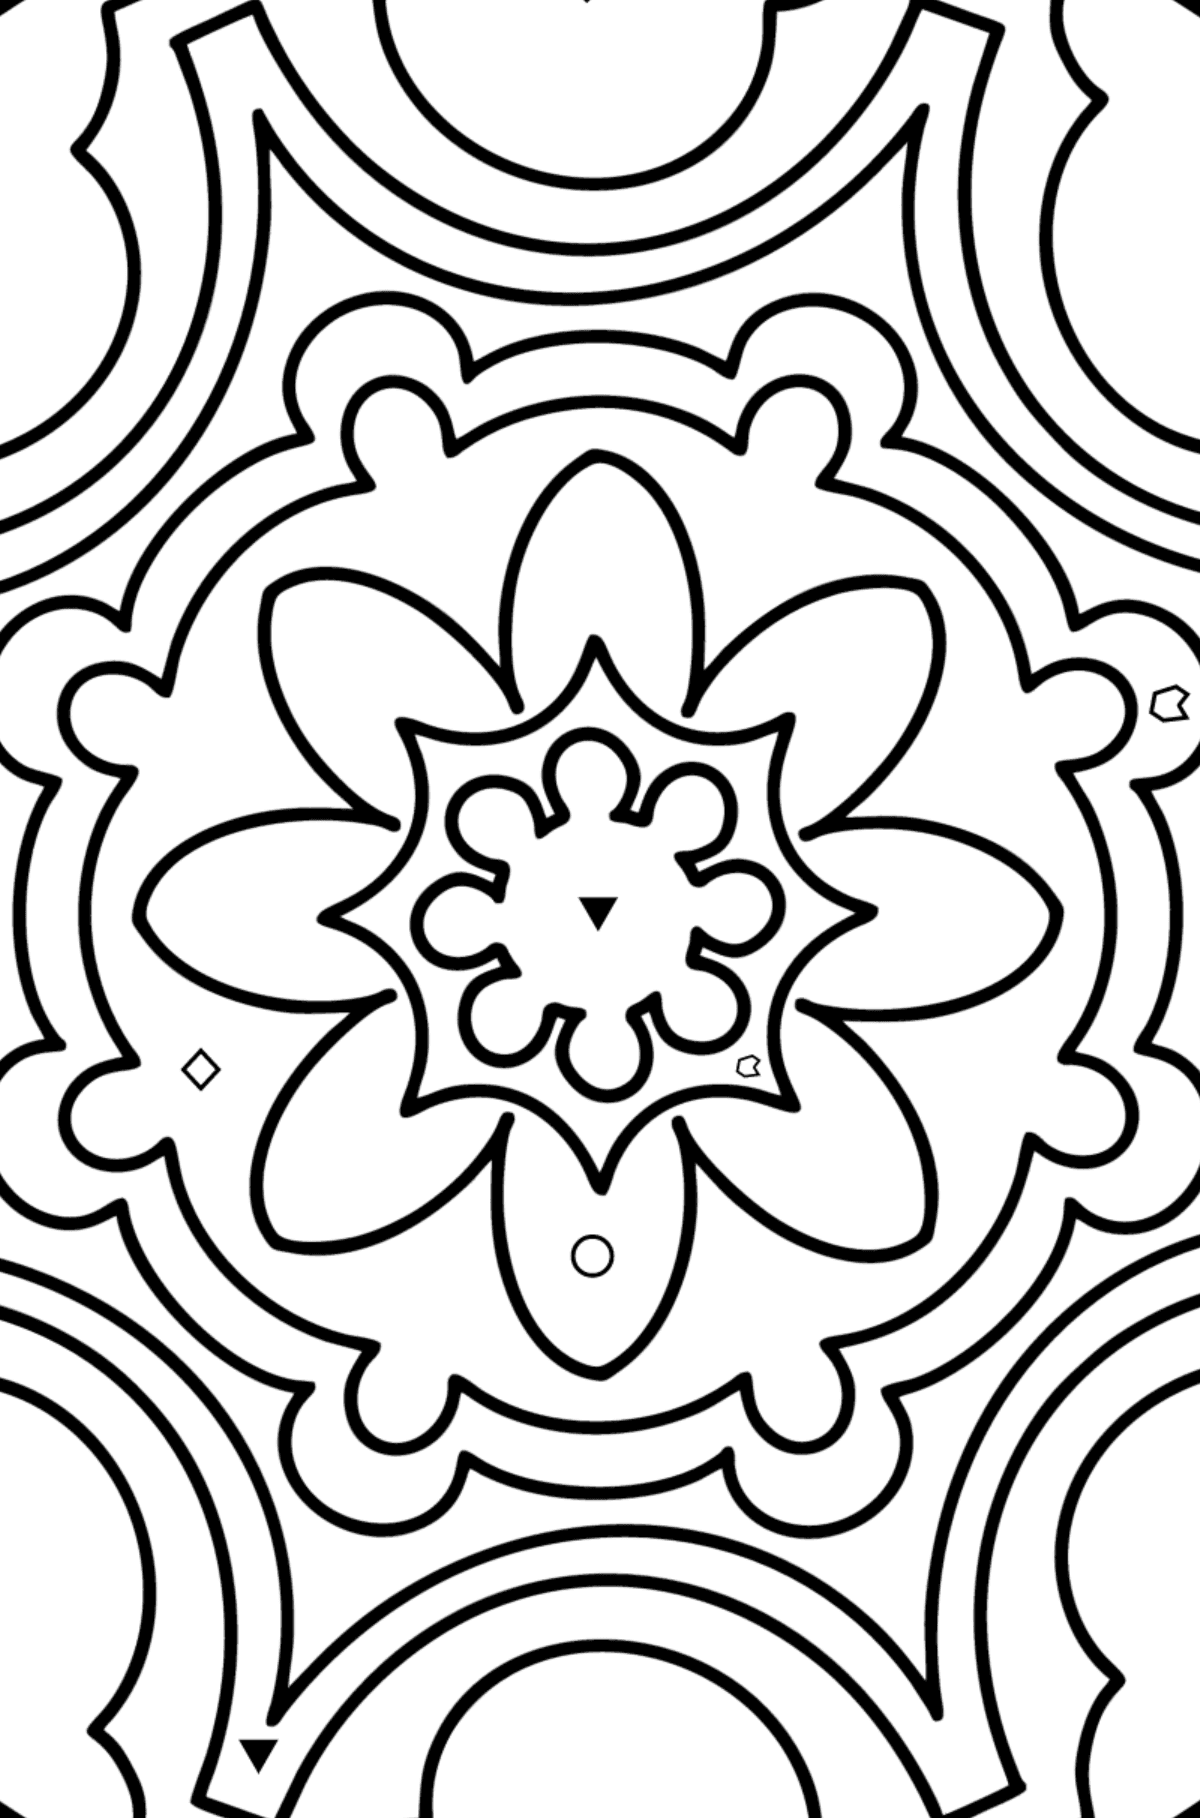 Mandala coloring page - 9 elements - Coloring by Symbols and Geometric Shapes for Kids